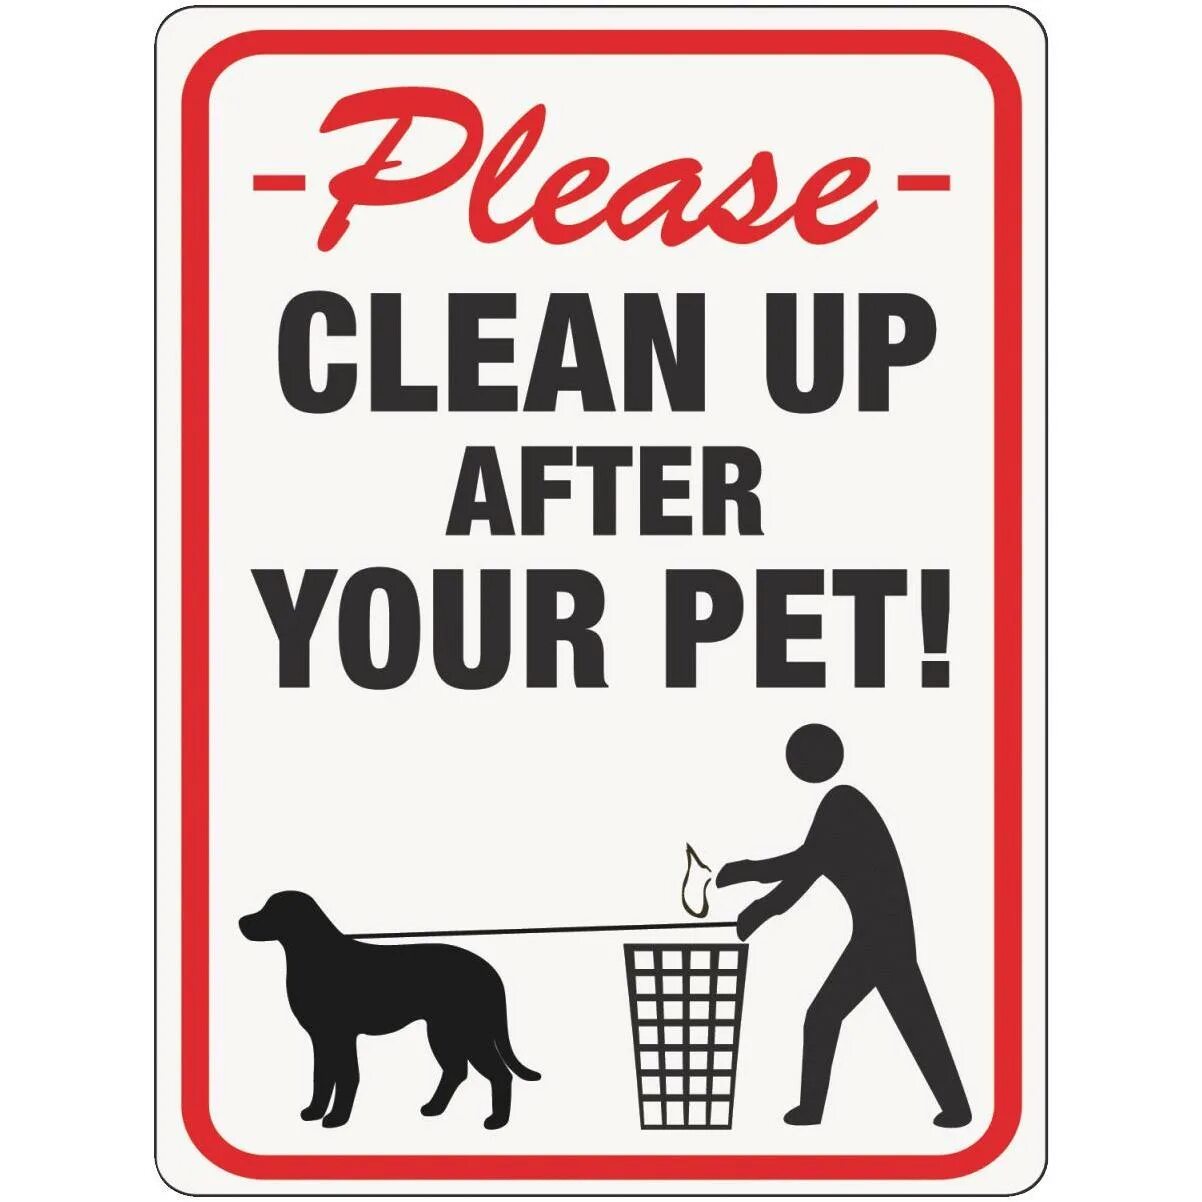 Clean up after your Dog. Please clean up after your Dog sign. Please clean after your Pet. Clean up after your Pet. Pet please